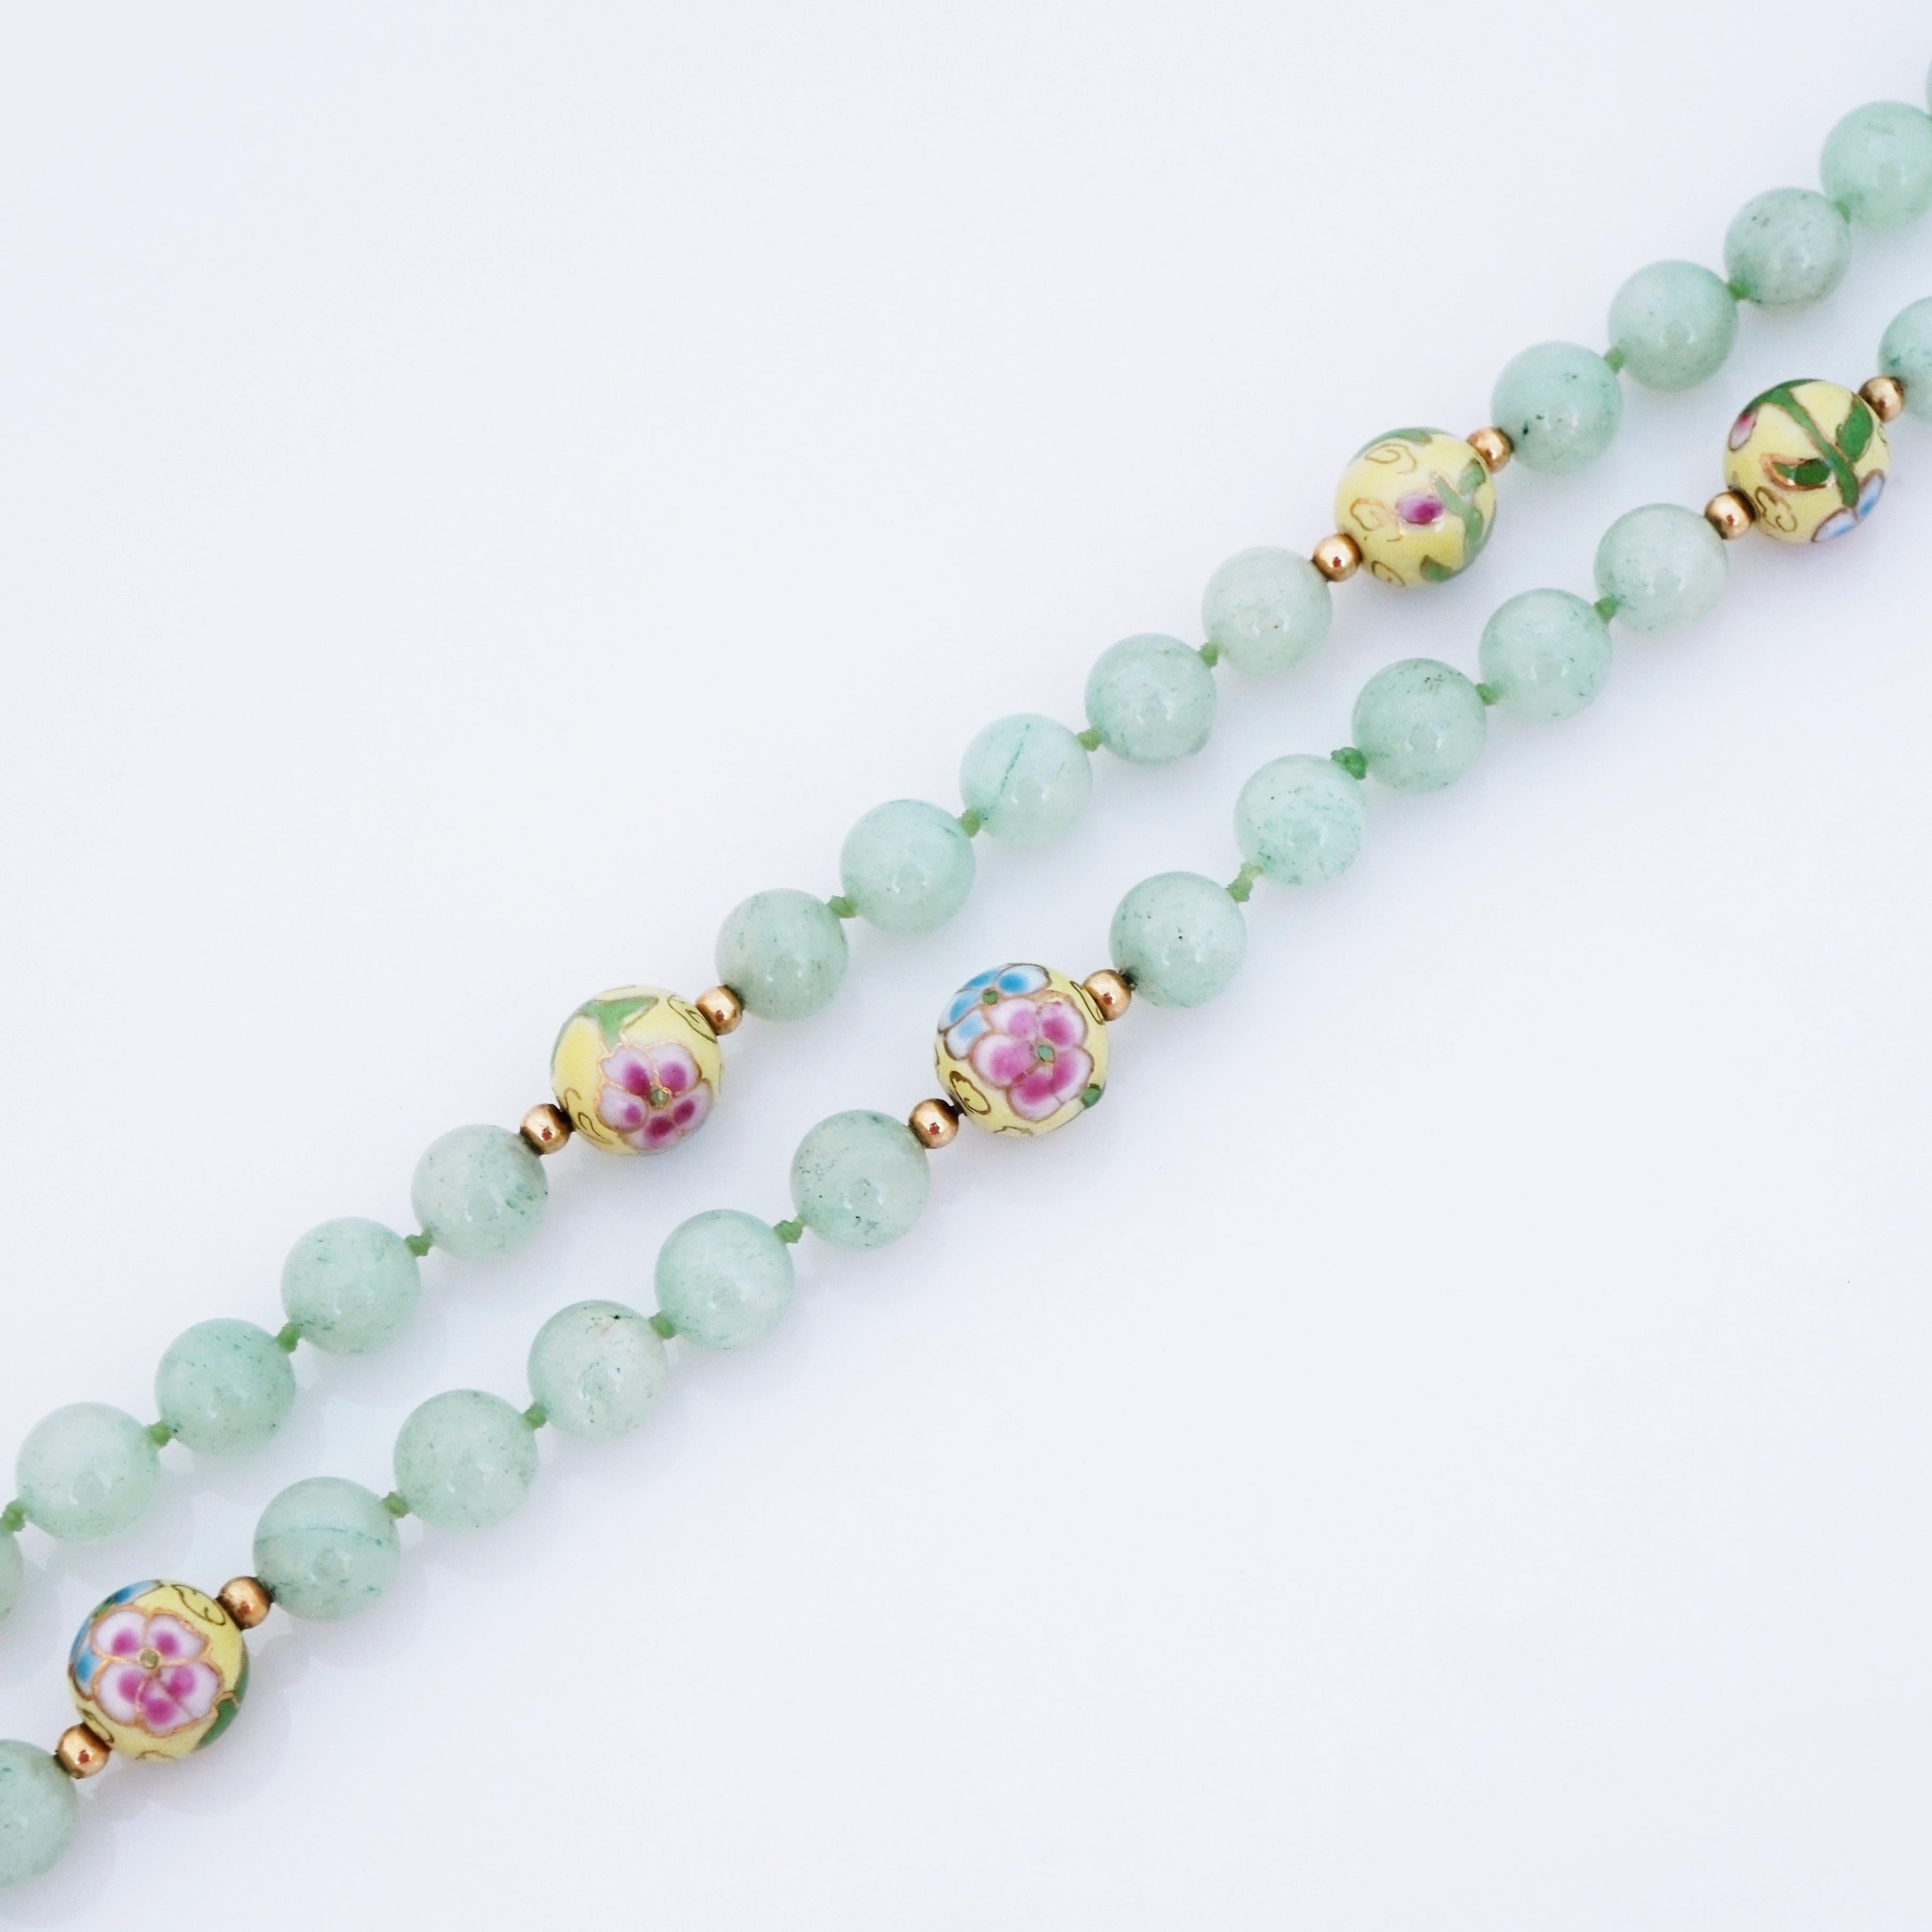 Modern Chinese Jade Gemstone Necklace With Cloisonné Enamel Floral Accent Beads, 1950s For Sale